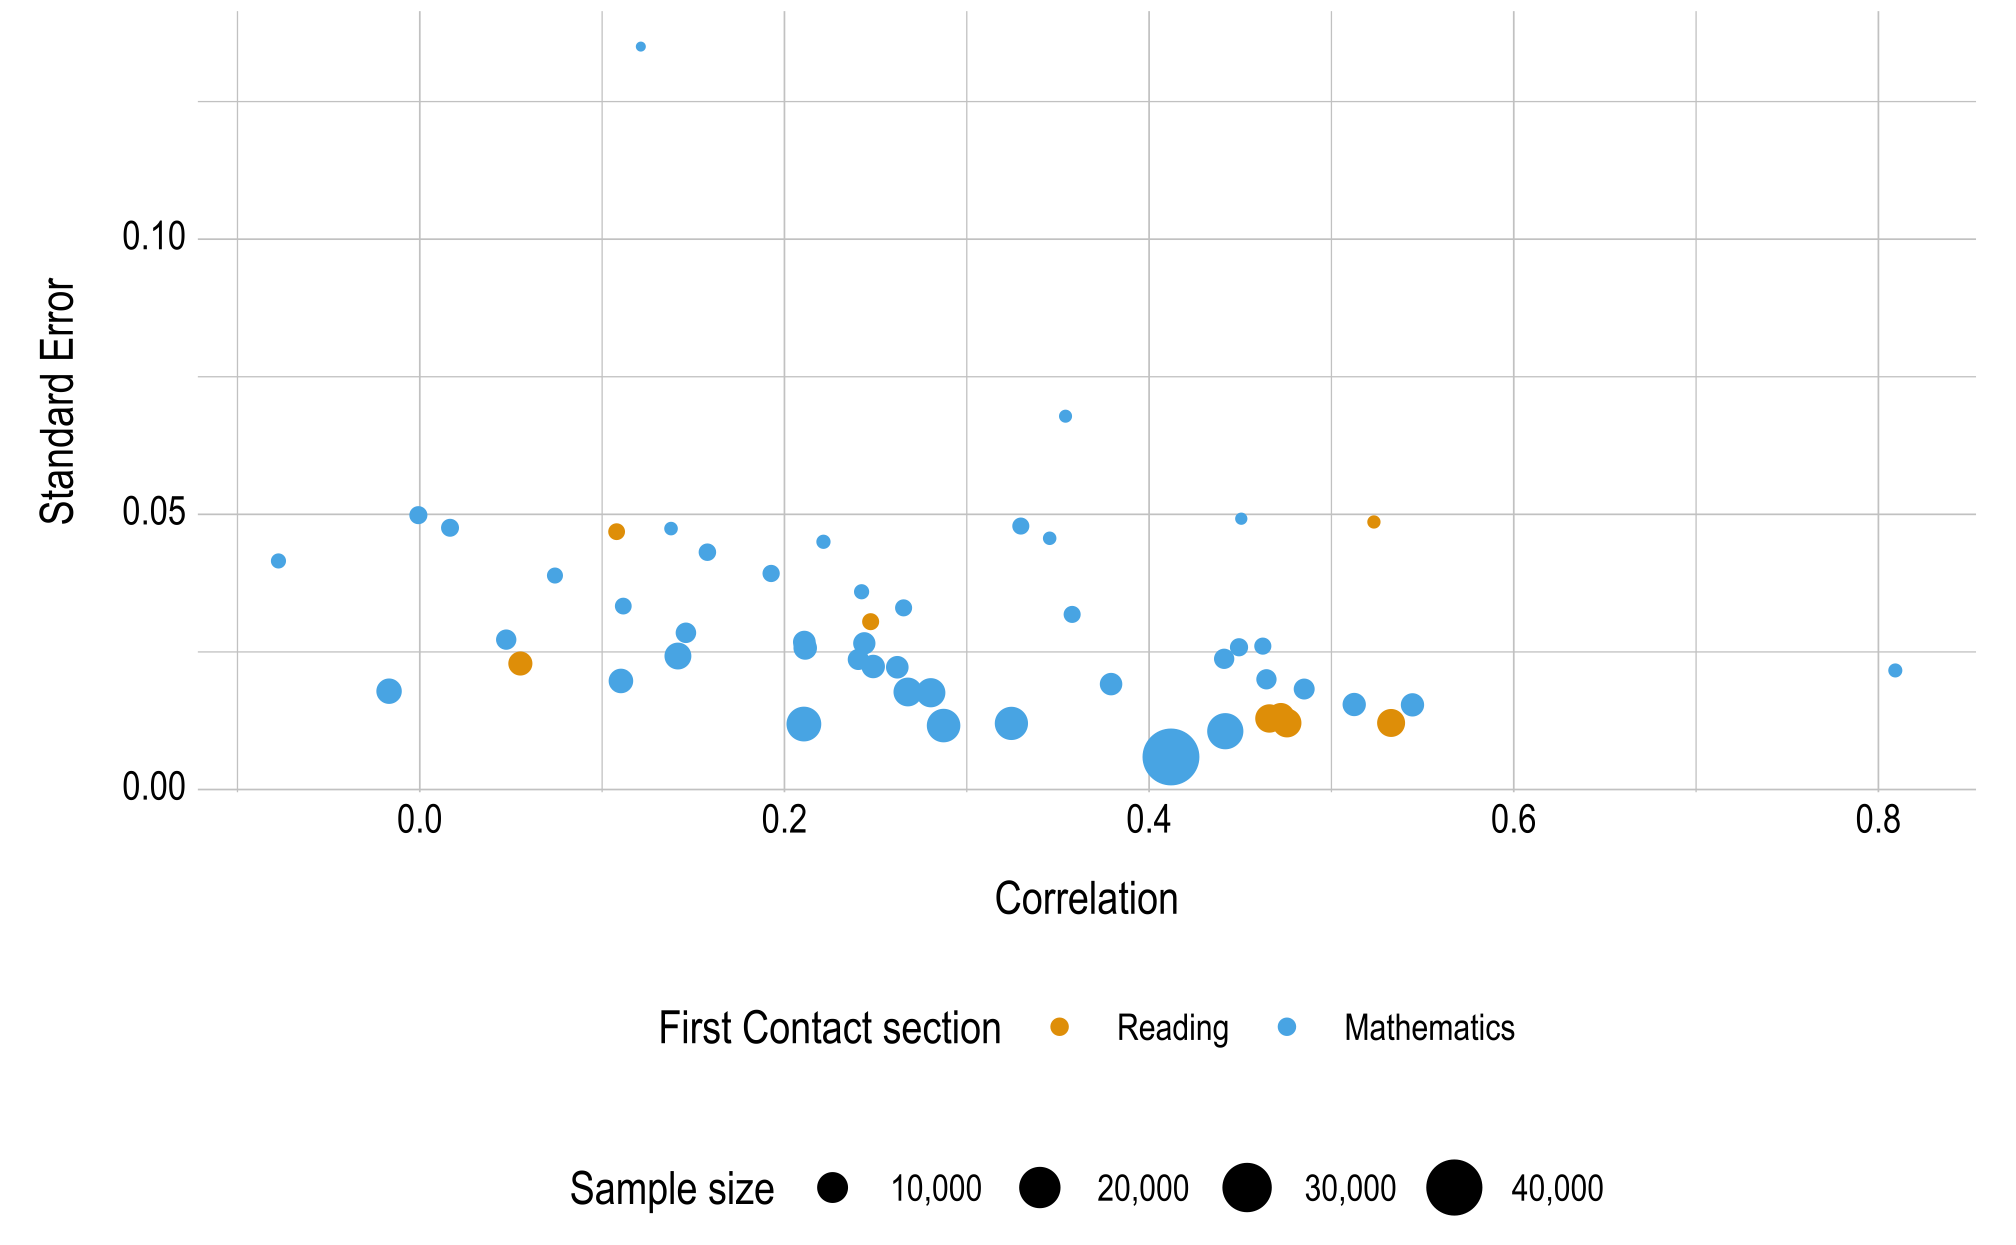 A scatter plot showing correlation on the x-axis and standard error on the y-axis. The of the points is scaled such that correlations based on smaller sample sizes are smaller. As the points get smaller, the standard error increases.